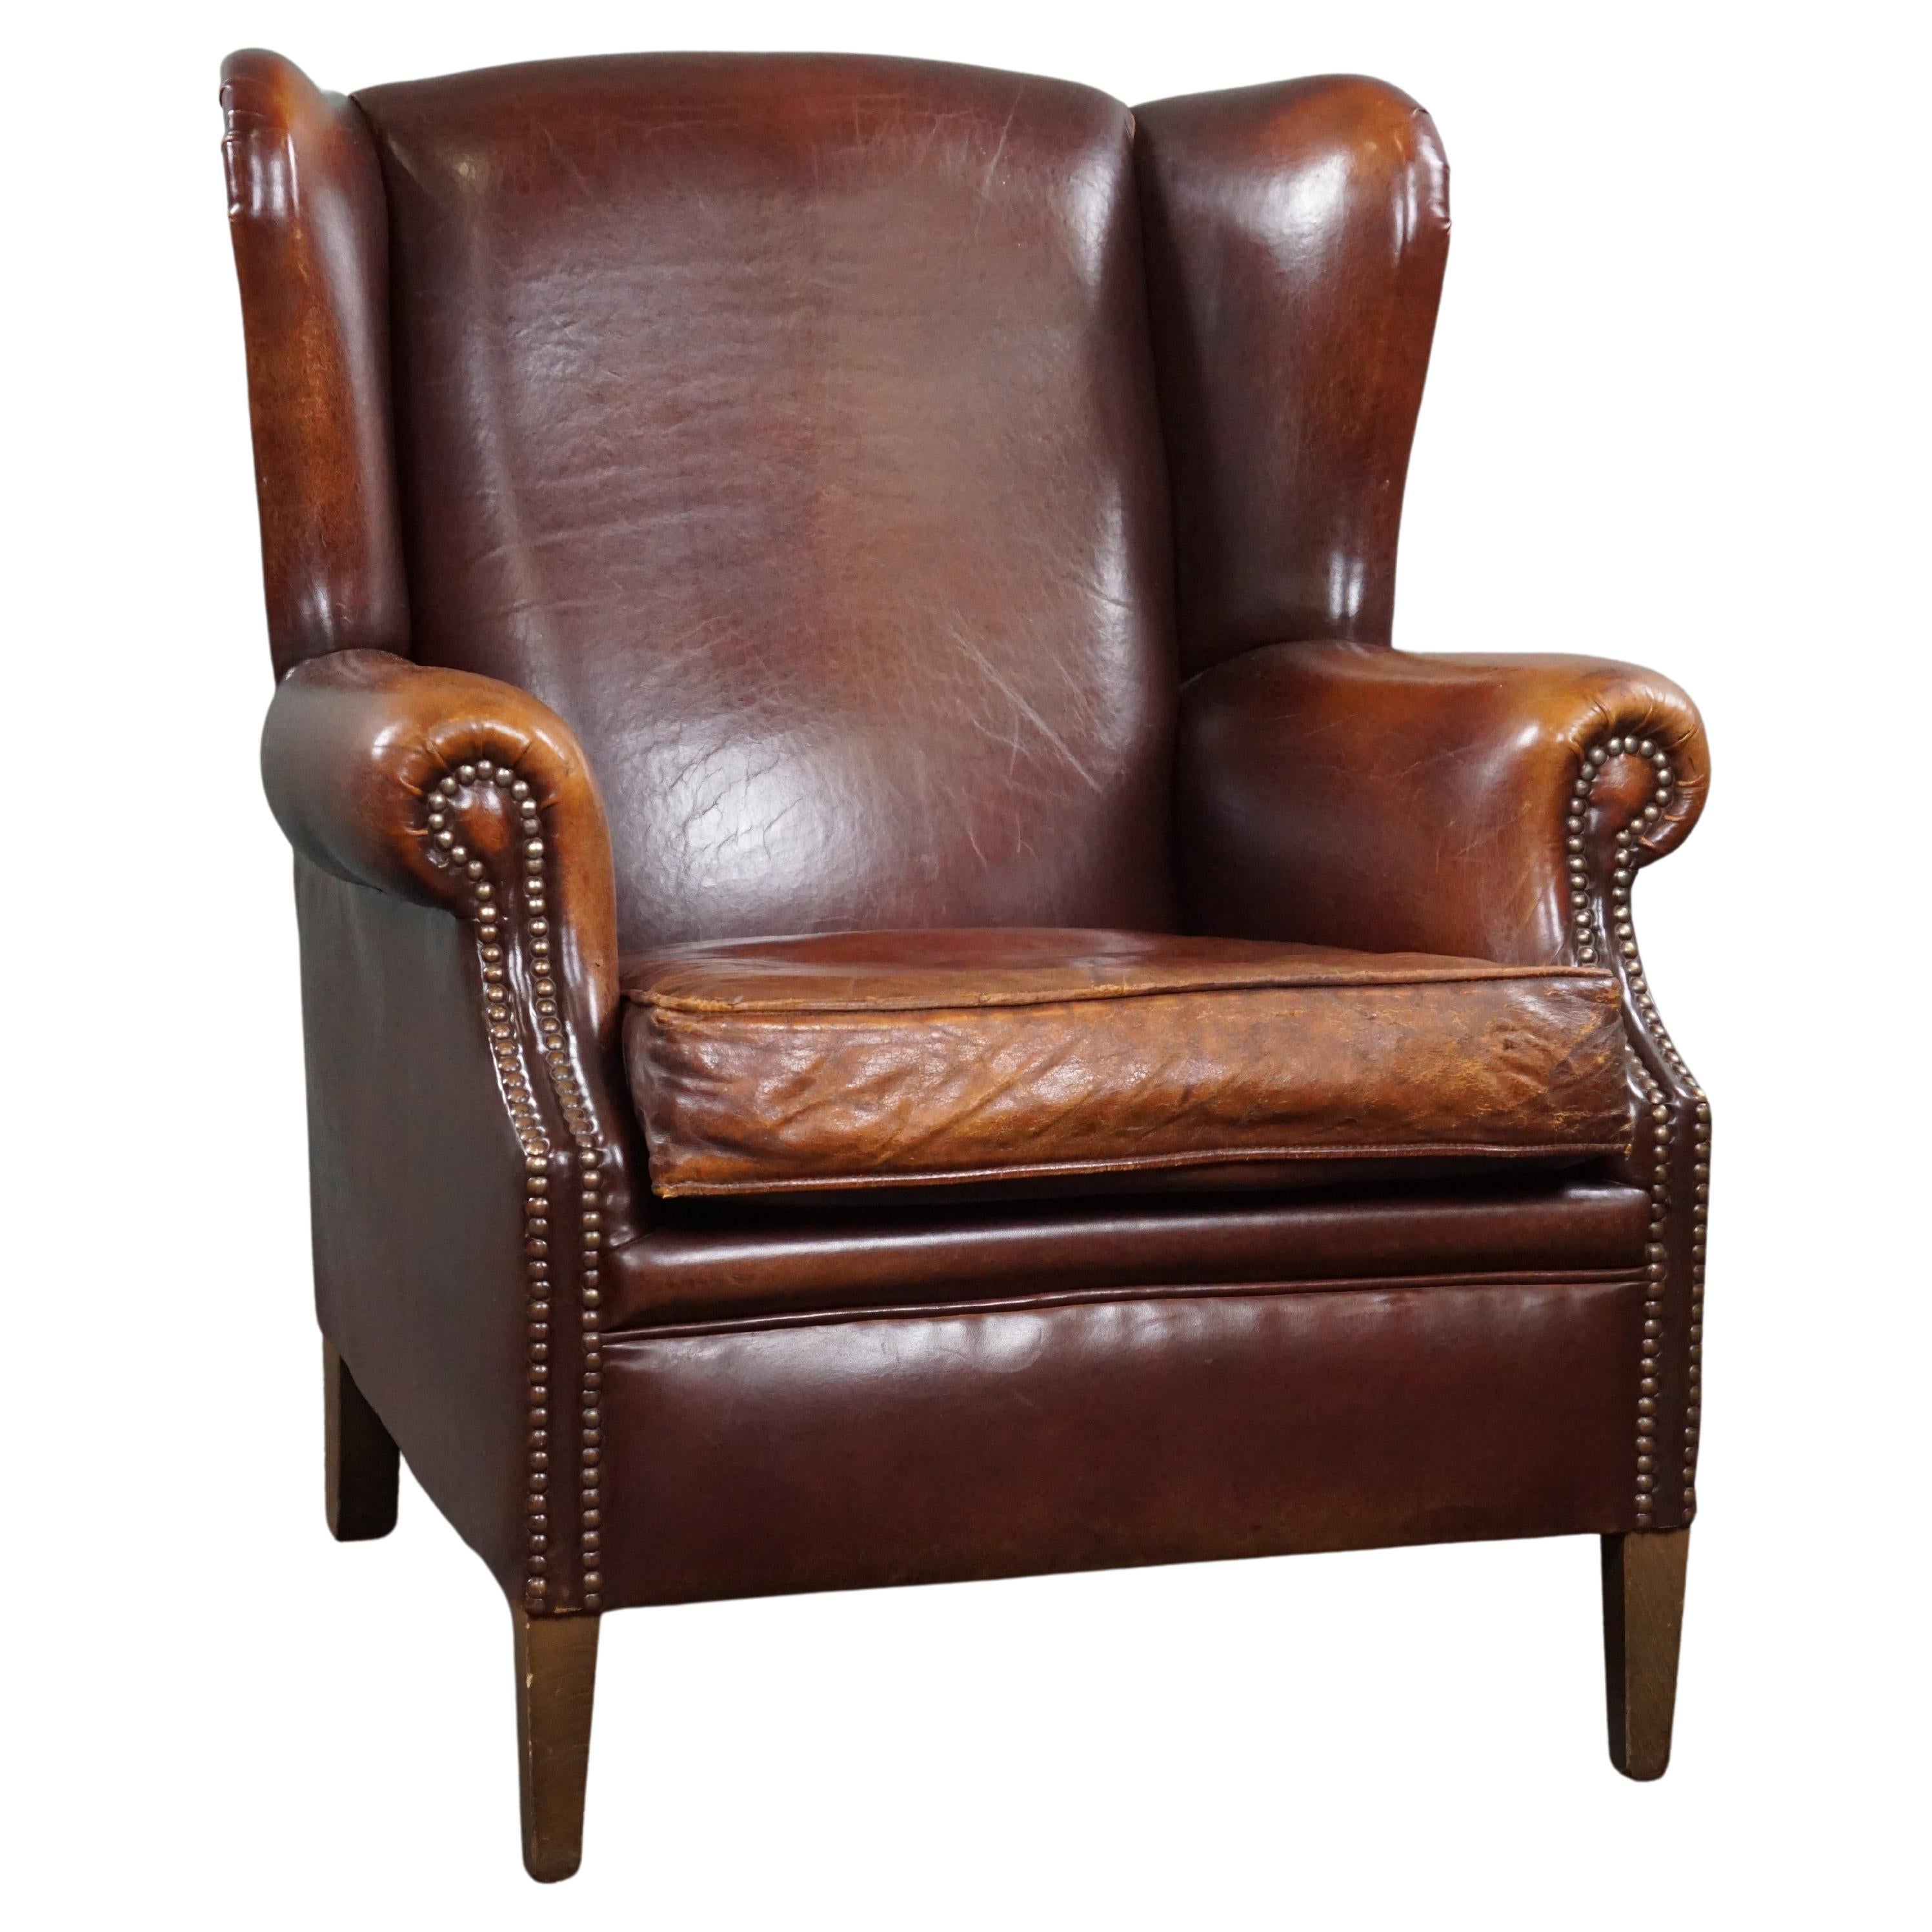 Very warm colored sheep leather wing chair 